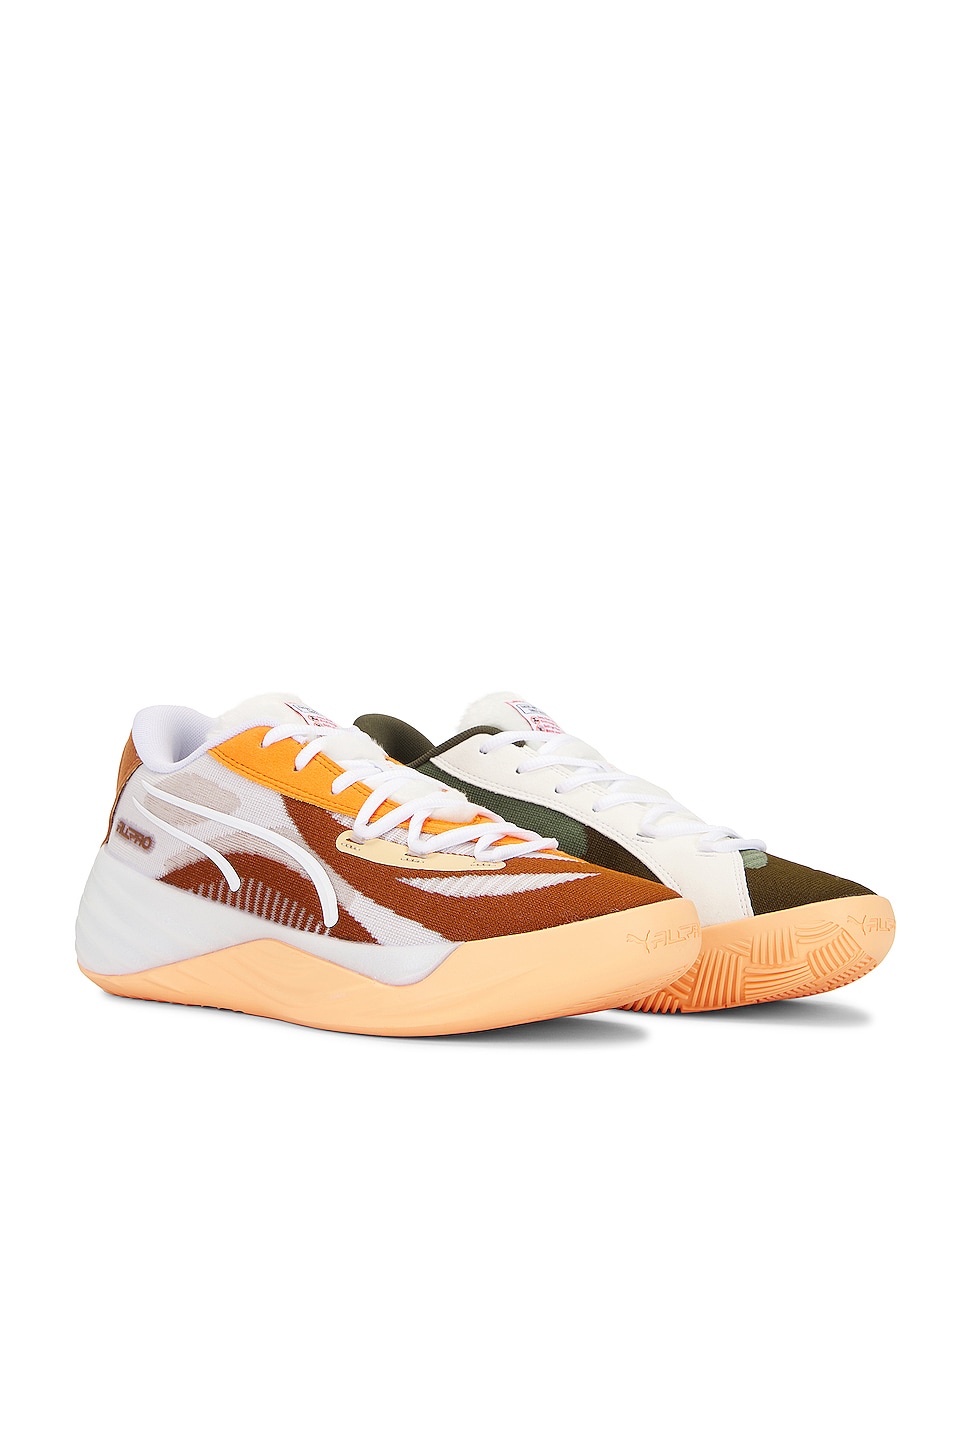 Image 1 of Puma Select All-pro Nitro Gremlins Sneaker in White